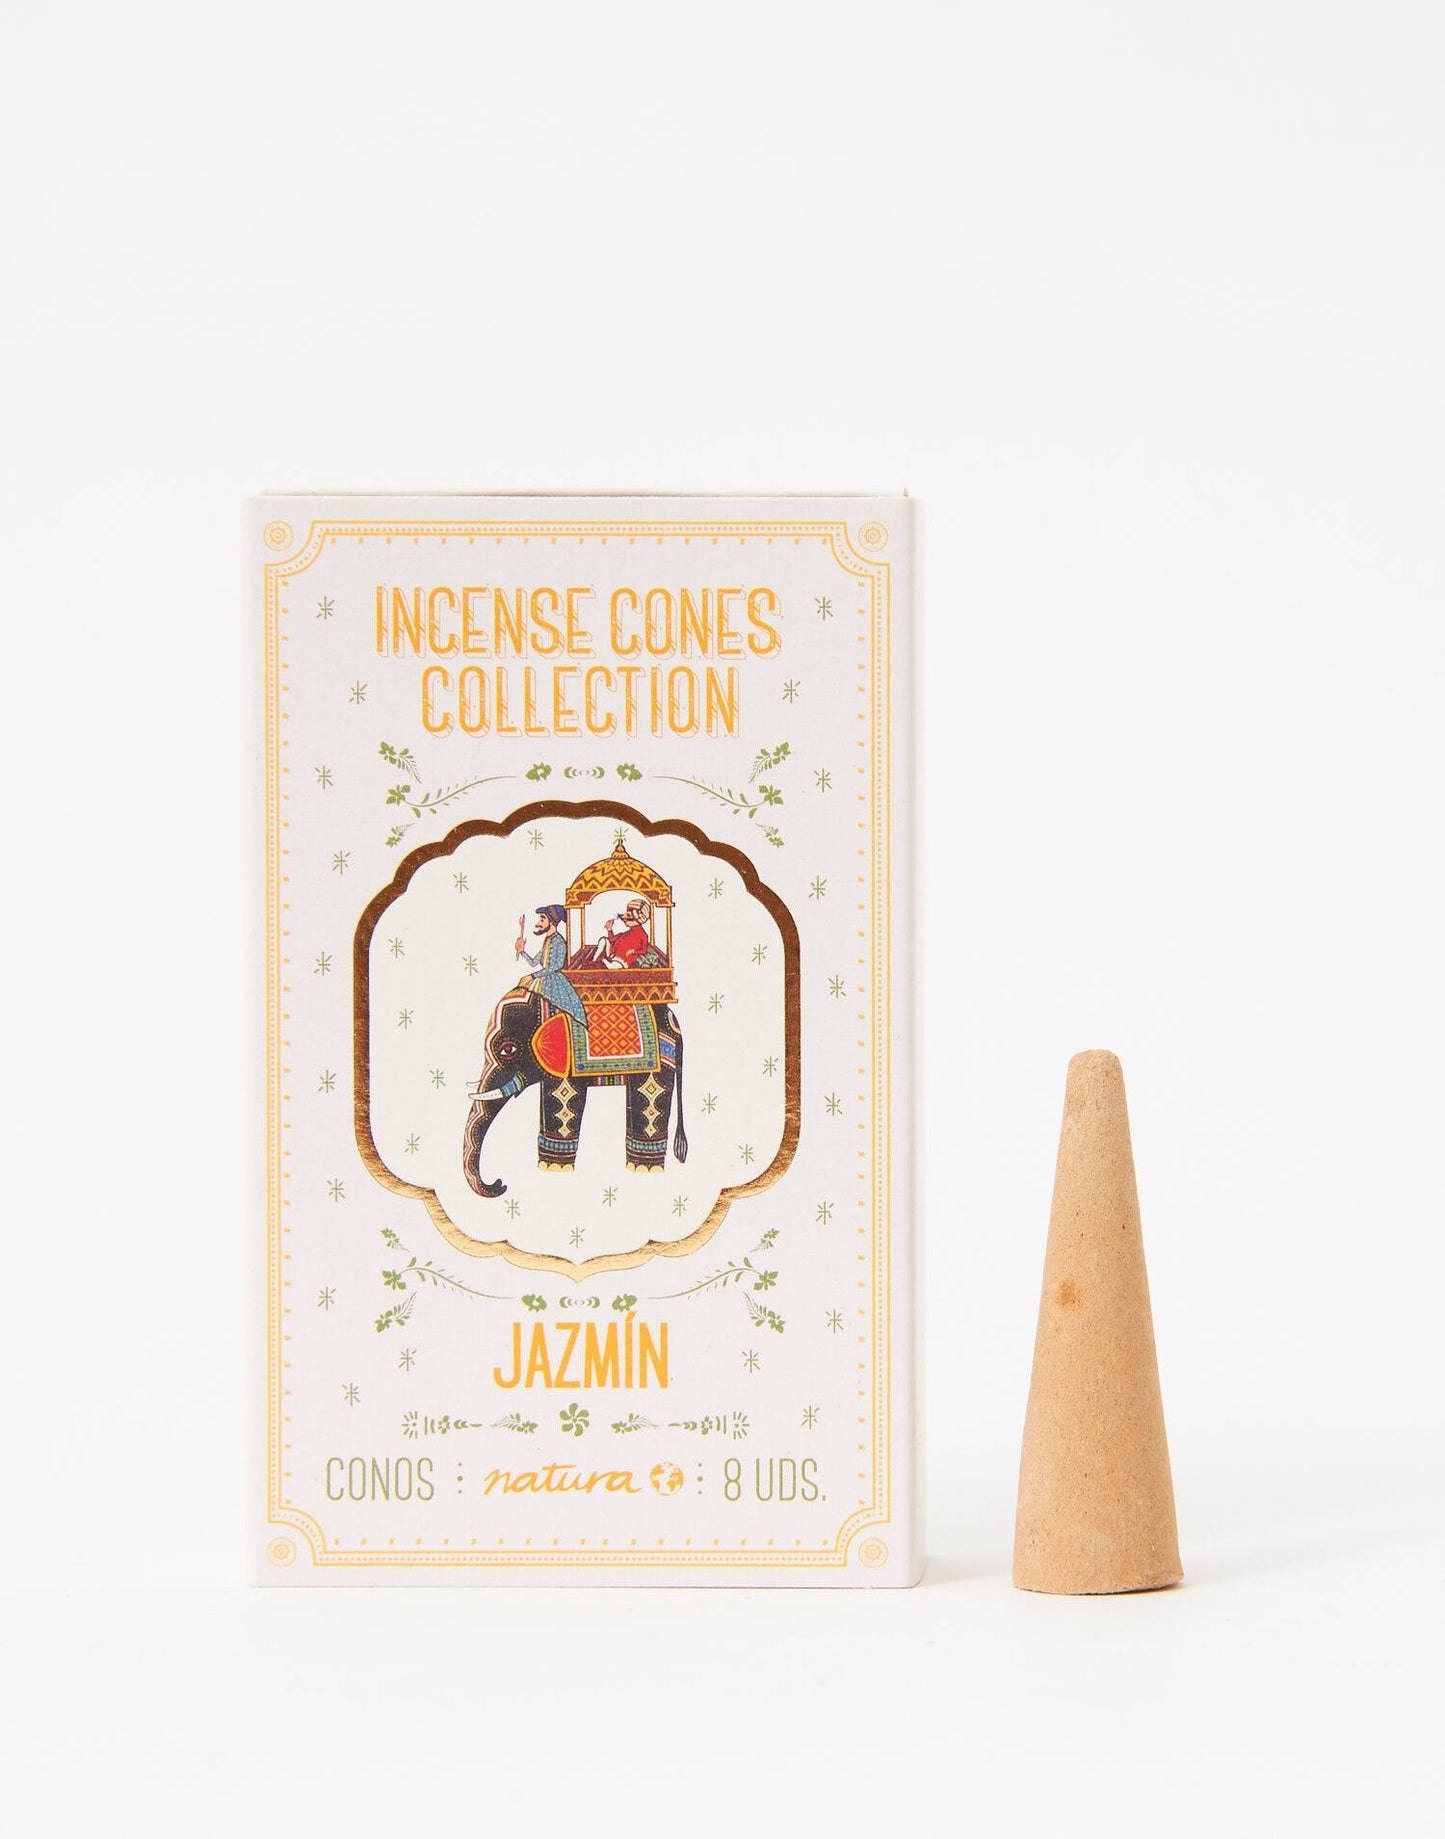 Giant cone incense